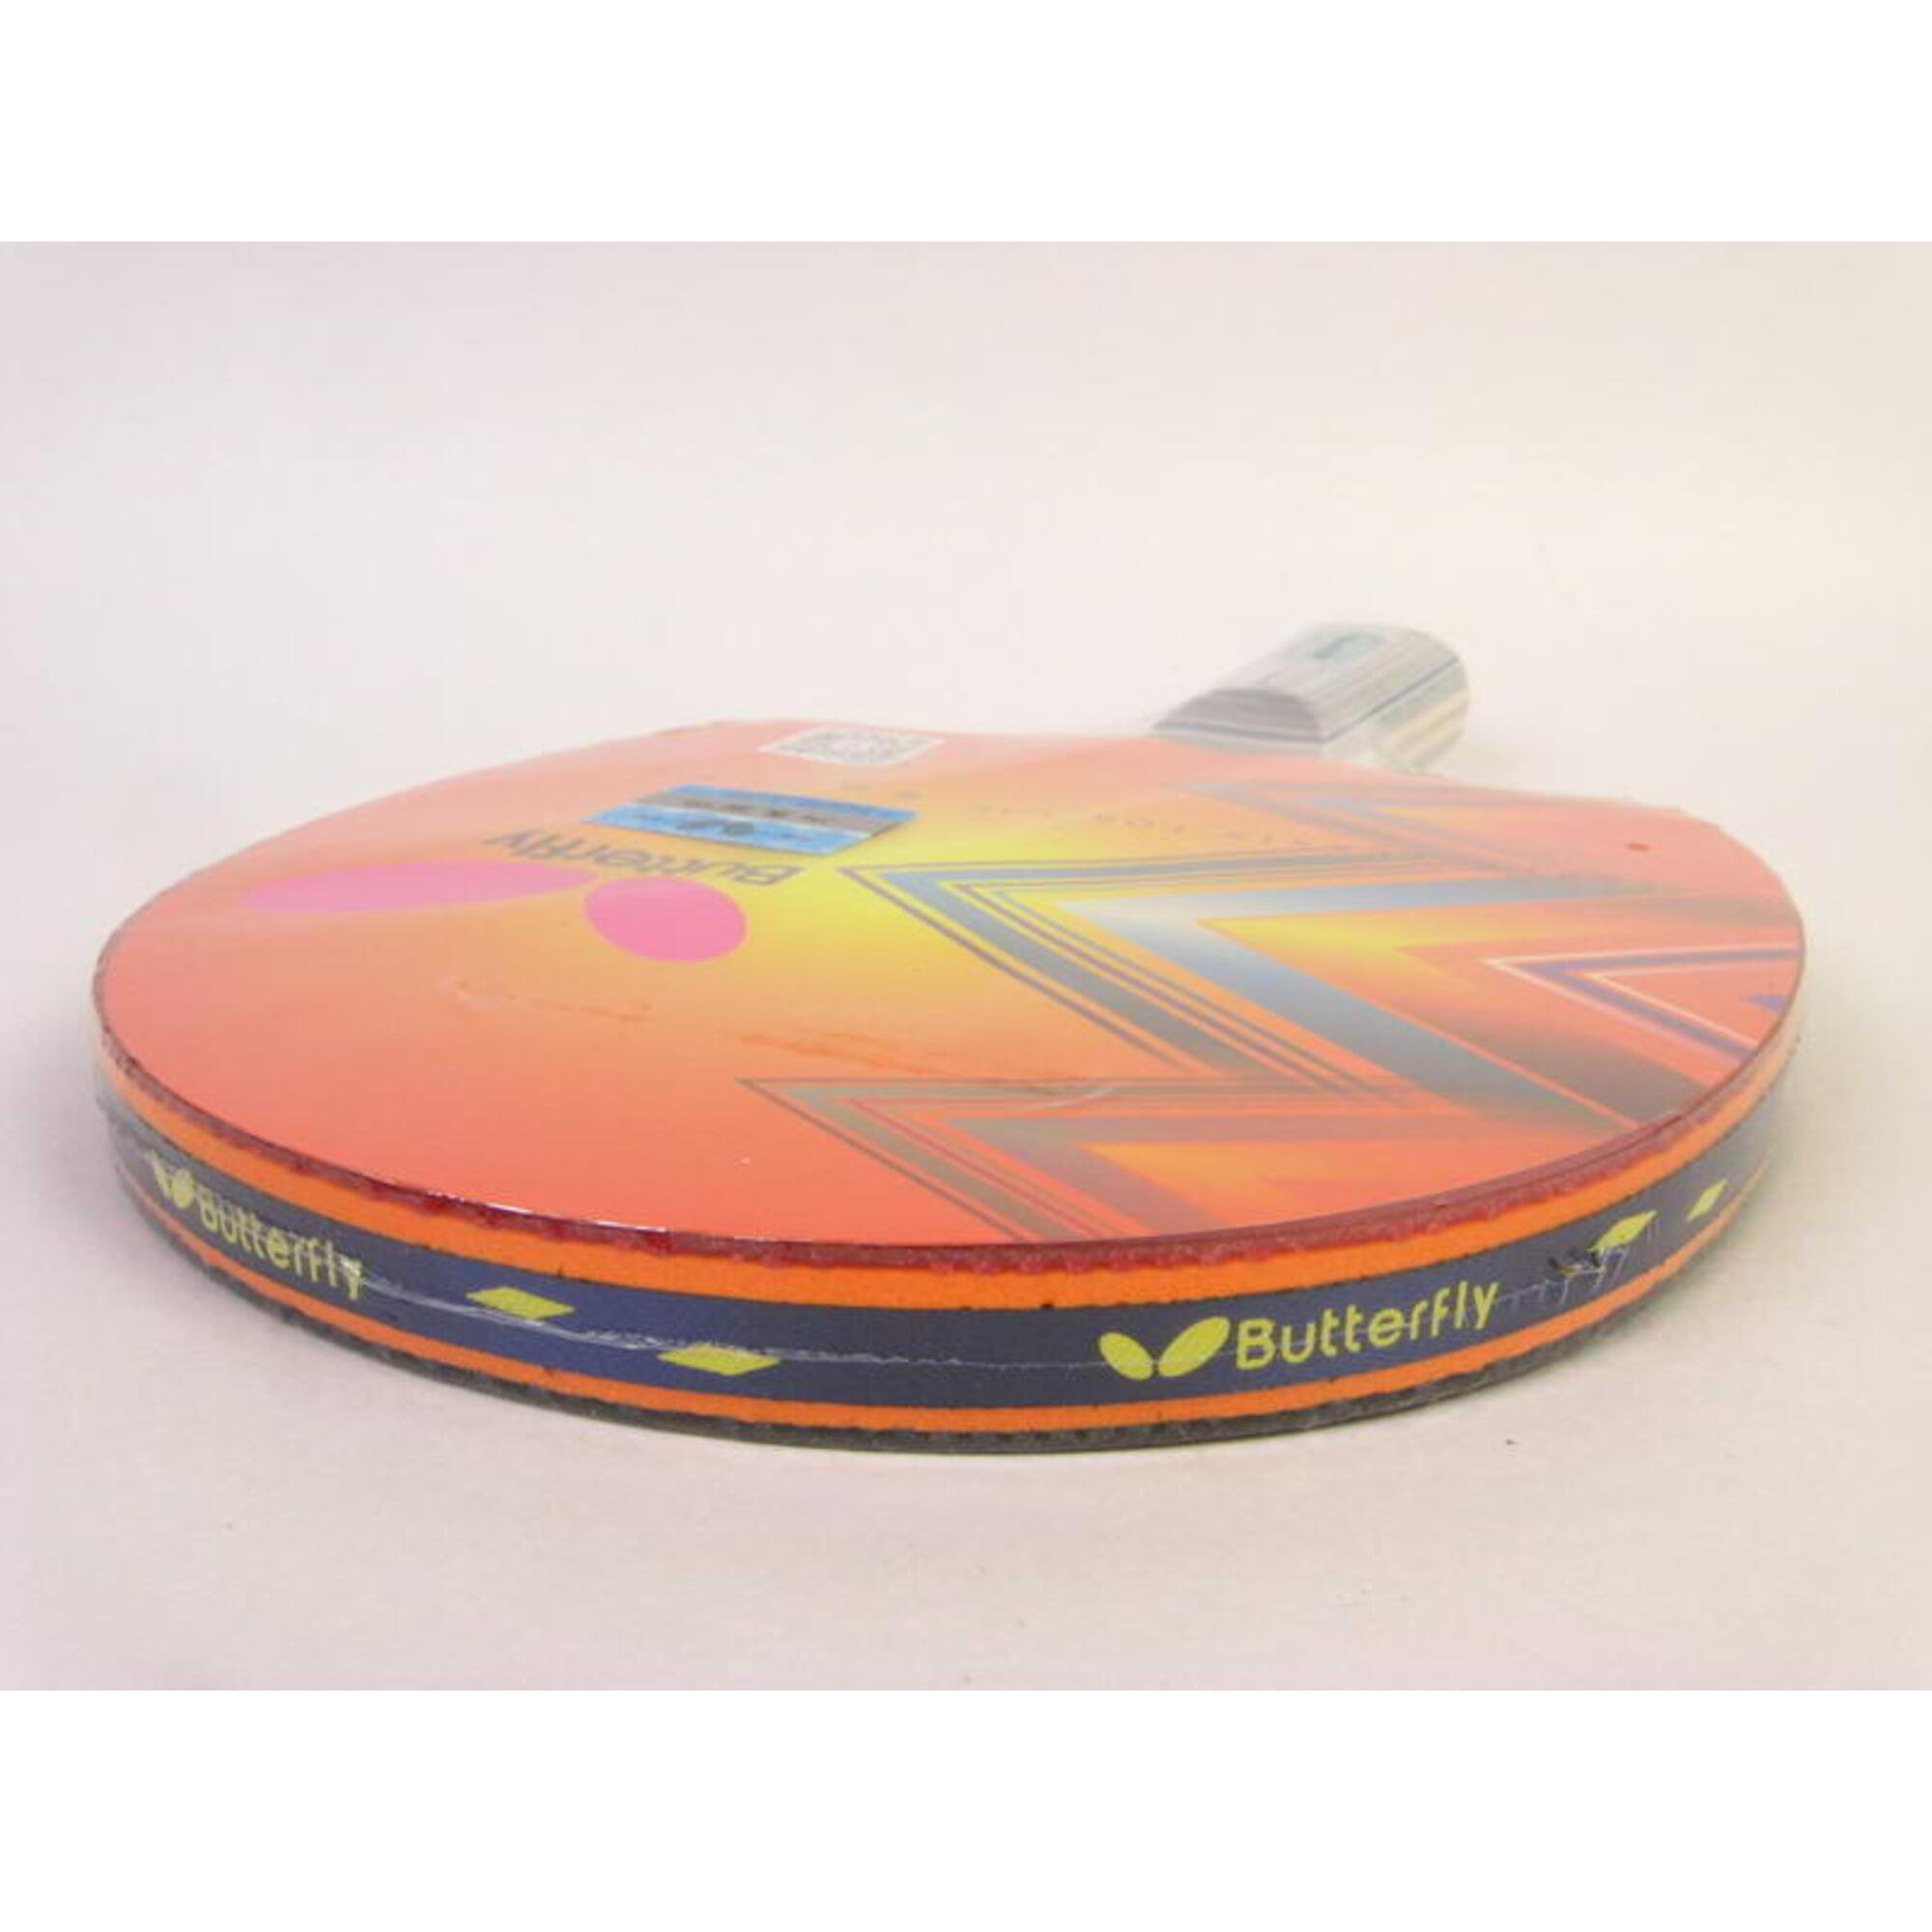 Butterfly 2 Series Table Tennis Racket, Short Handle, In two-sides